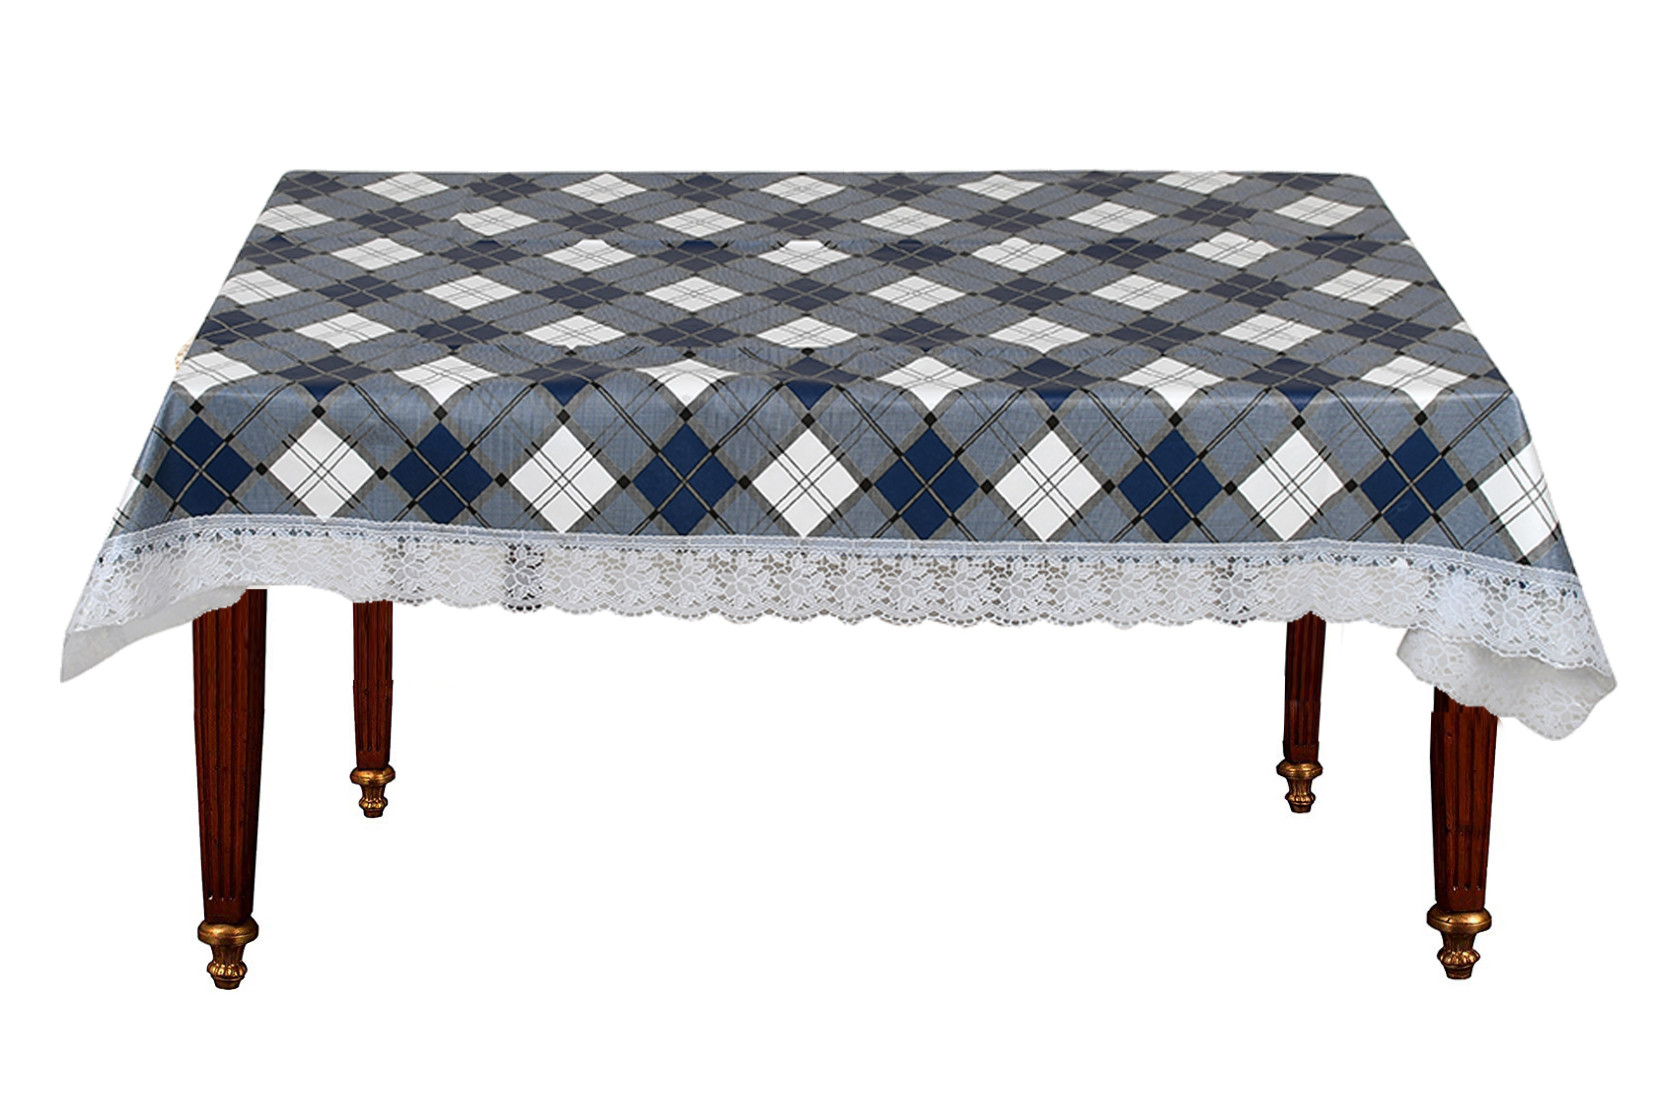 Kuber Industries Square Print PVC 4 Seater Center Table Cover 40